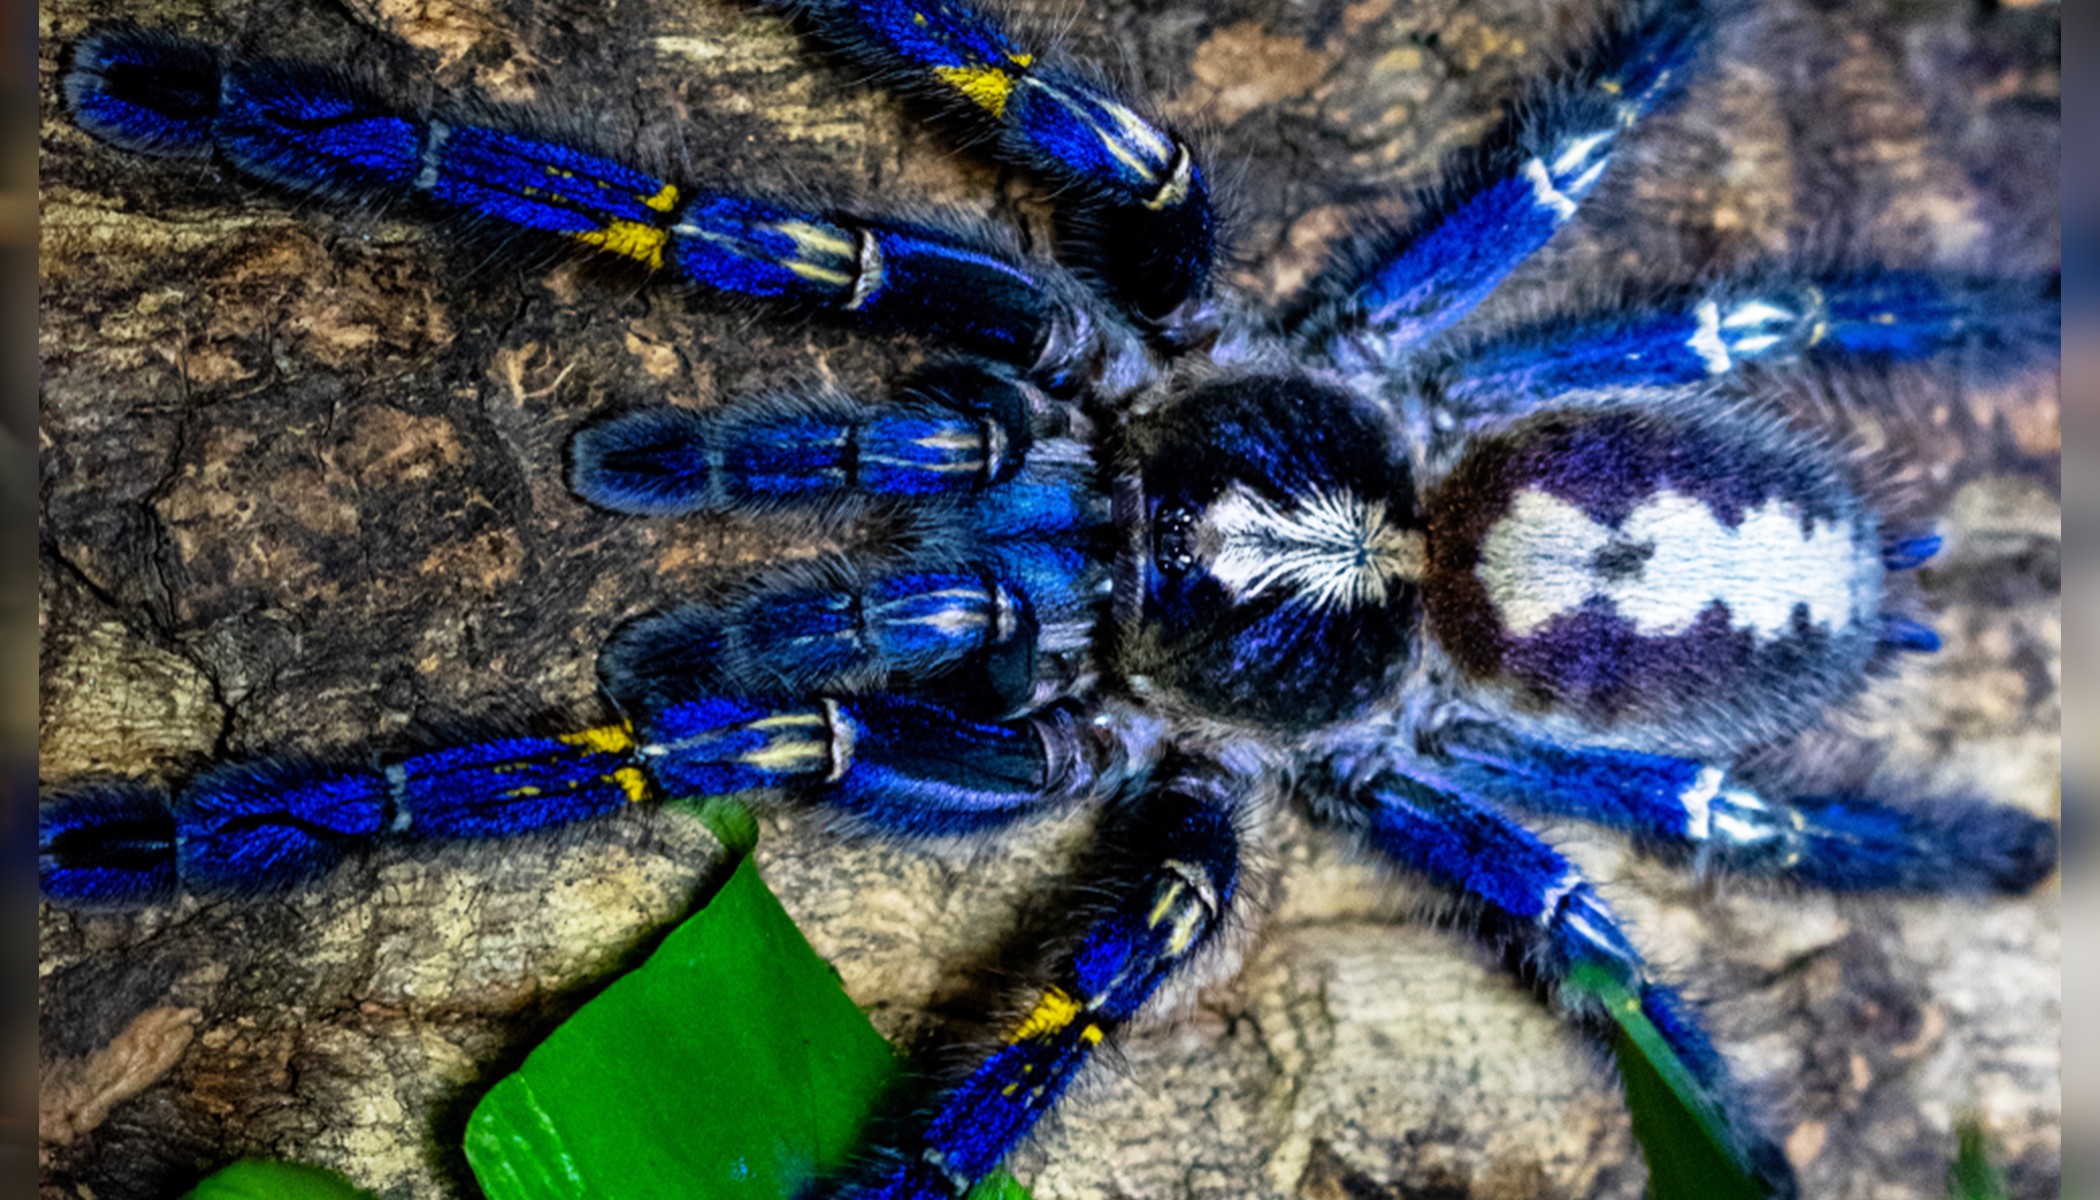 Electric-Blue Peacock Tarantula May Be One of the Most Eye-Catching Endangered  Species